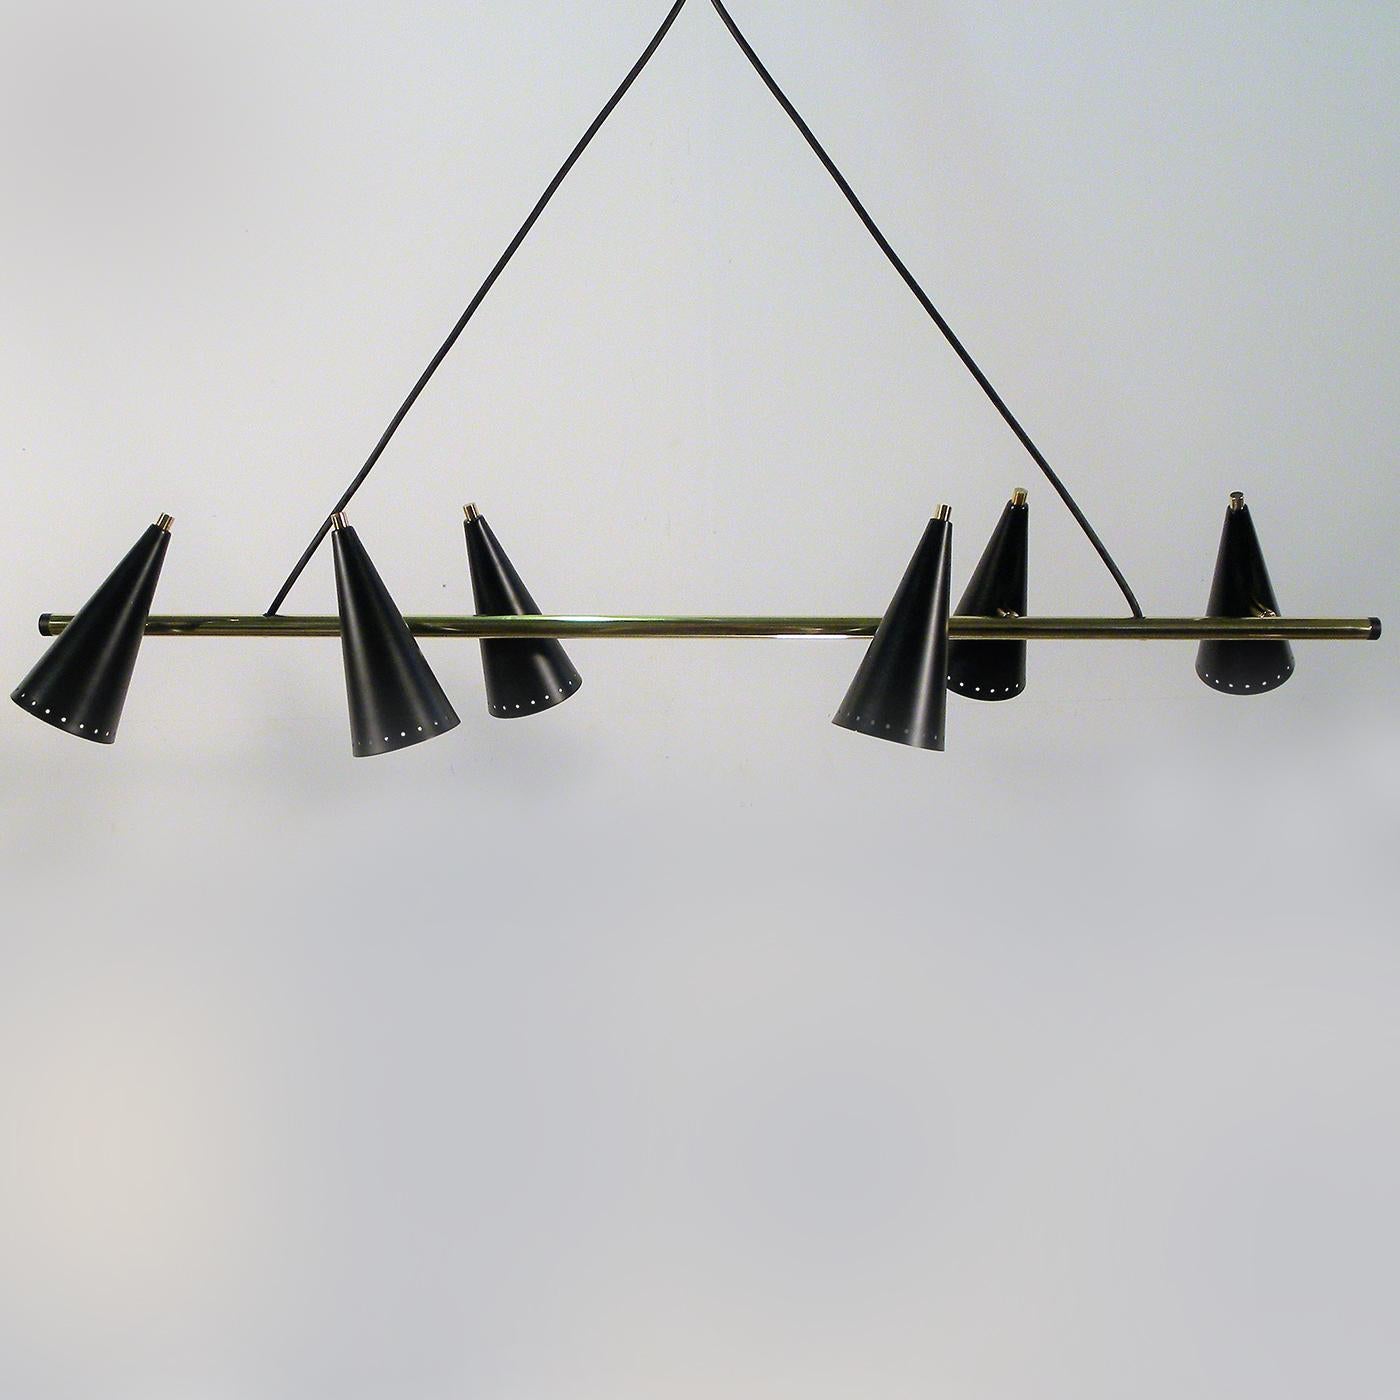 Part of the whimsical Fiftyes collection, inspired by the elegance and charm of the Italian 1950s style, this chandelier features a geometric and Minimalist structure in black-lacquered metal with details in brass. Six conical metal shades of